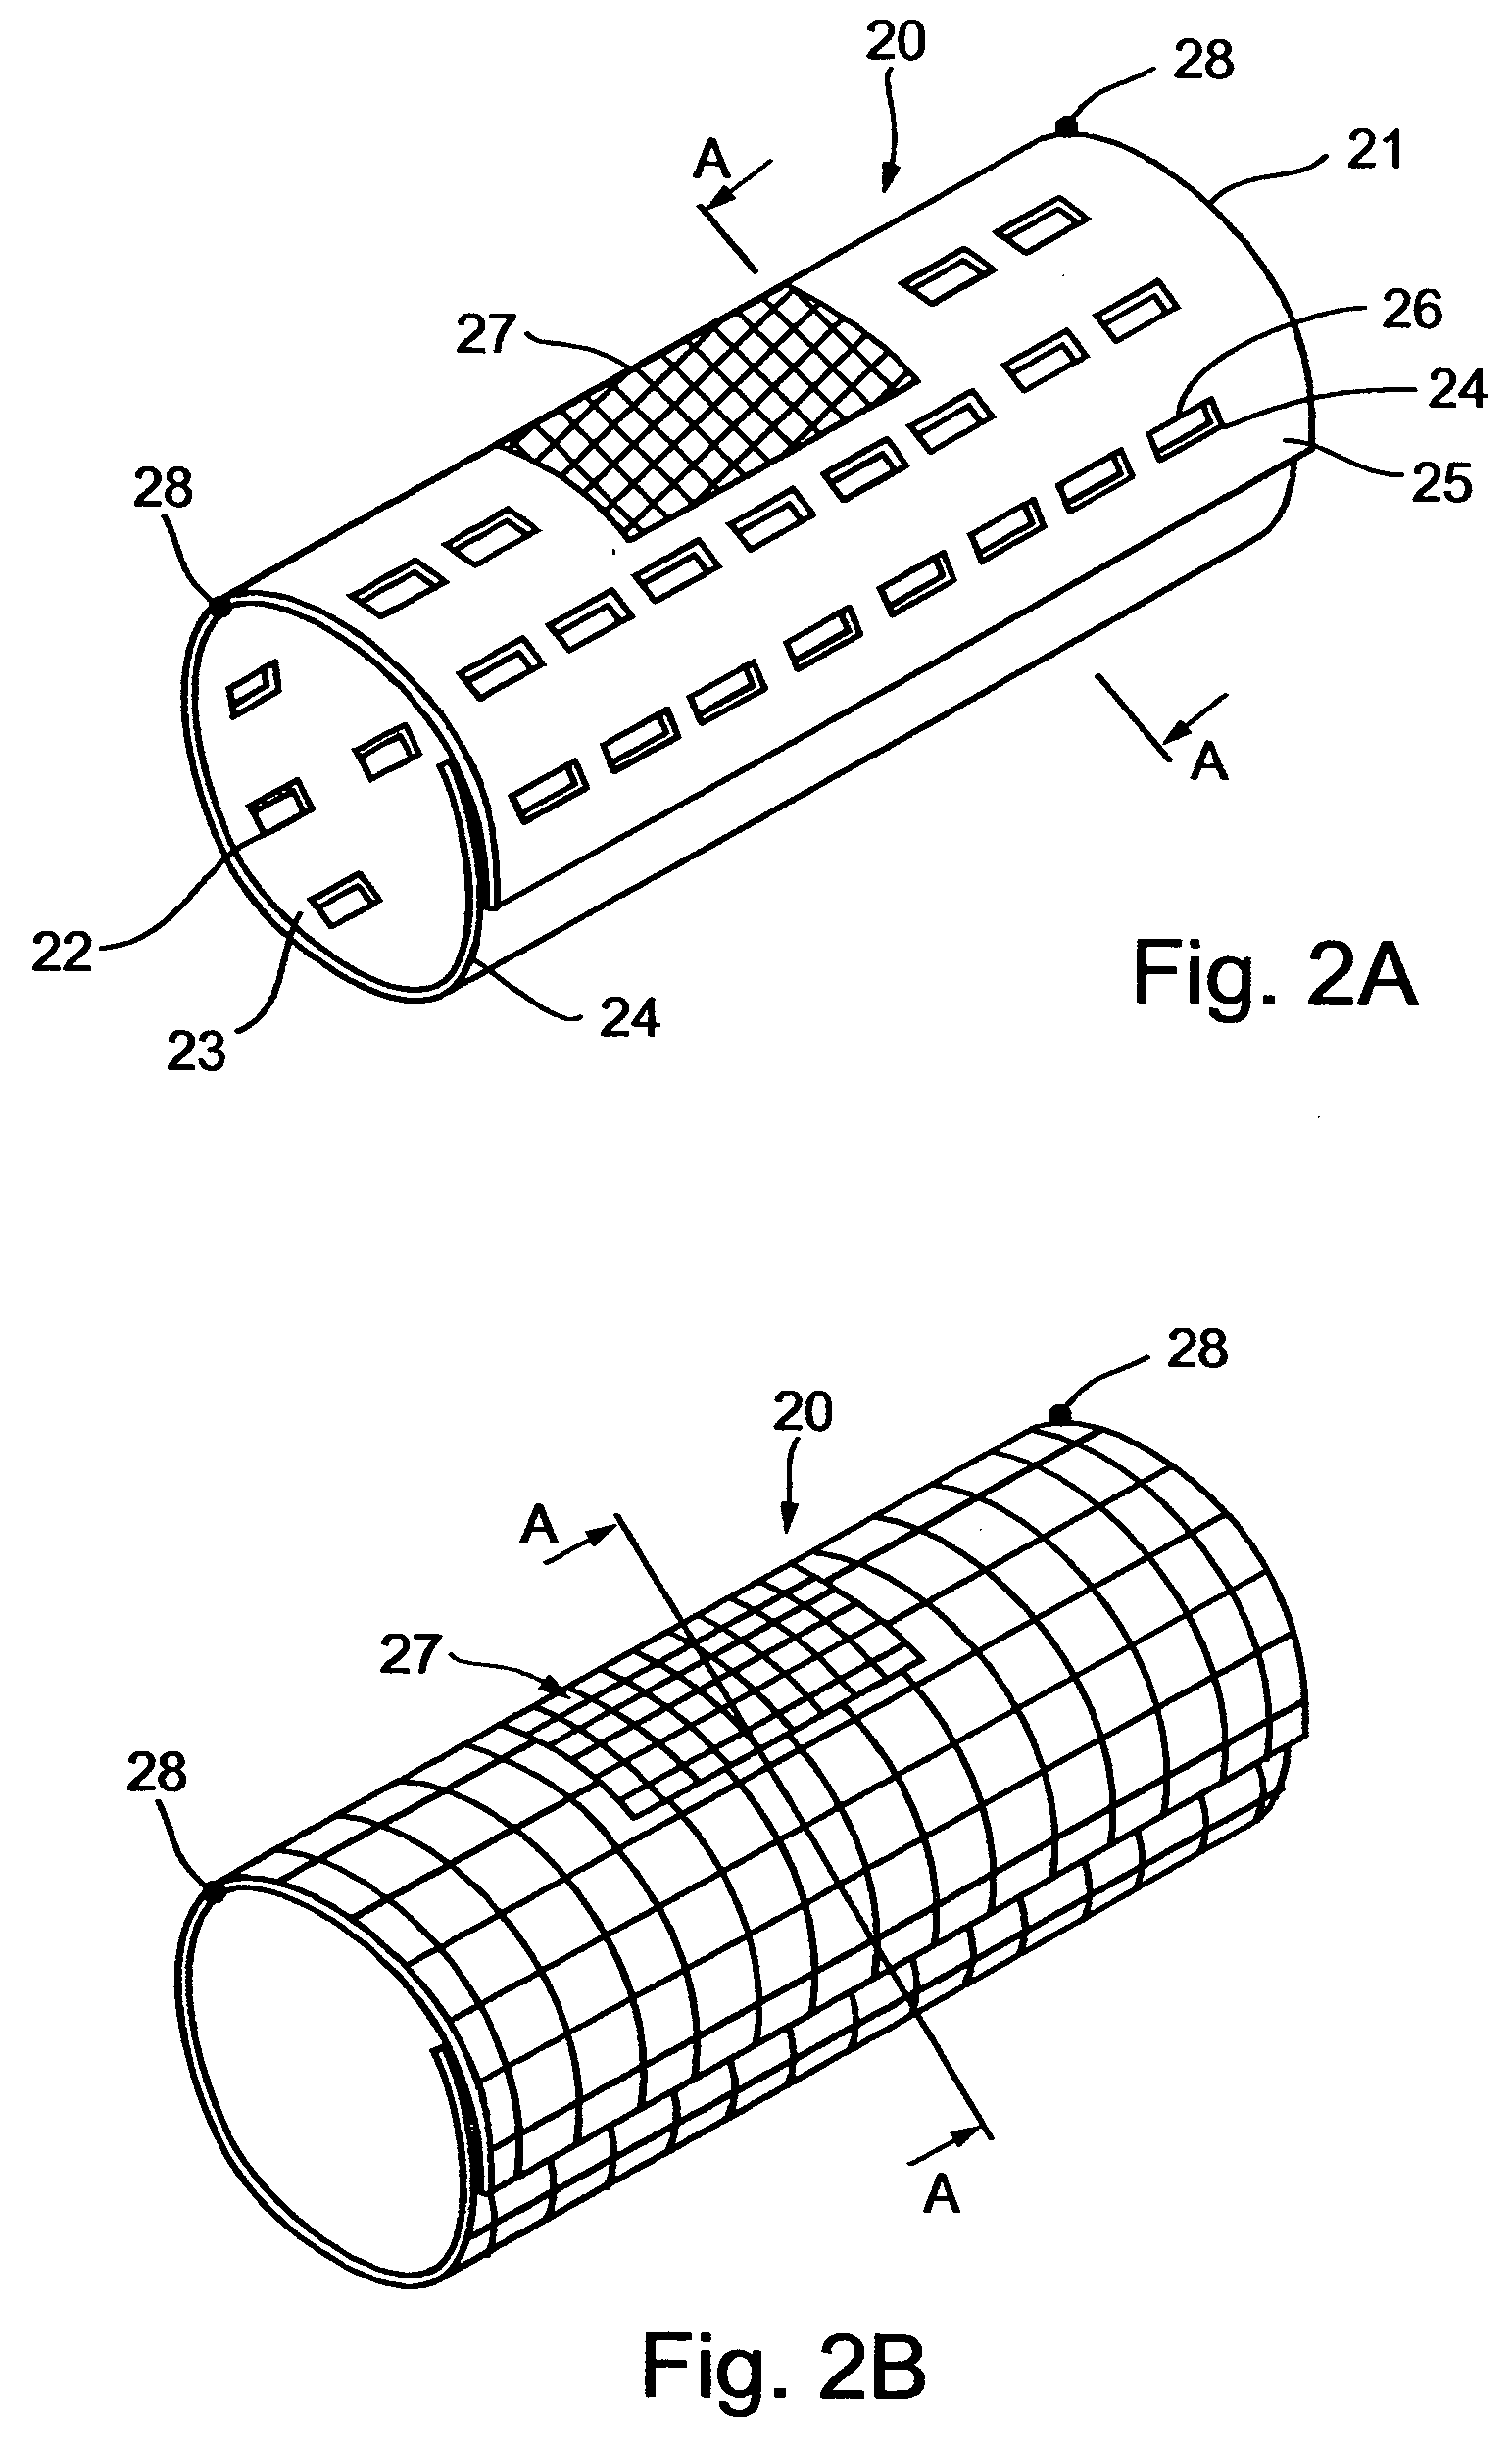 Implantable integral device and corresponding method for deflecting embolic material in blood flowing at an arterial bifurcation